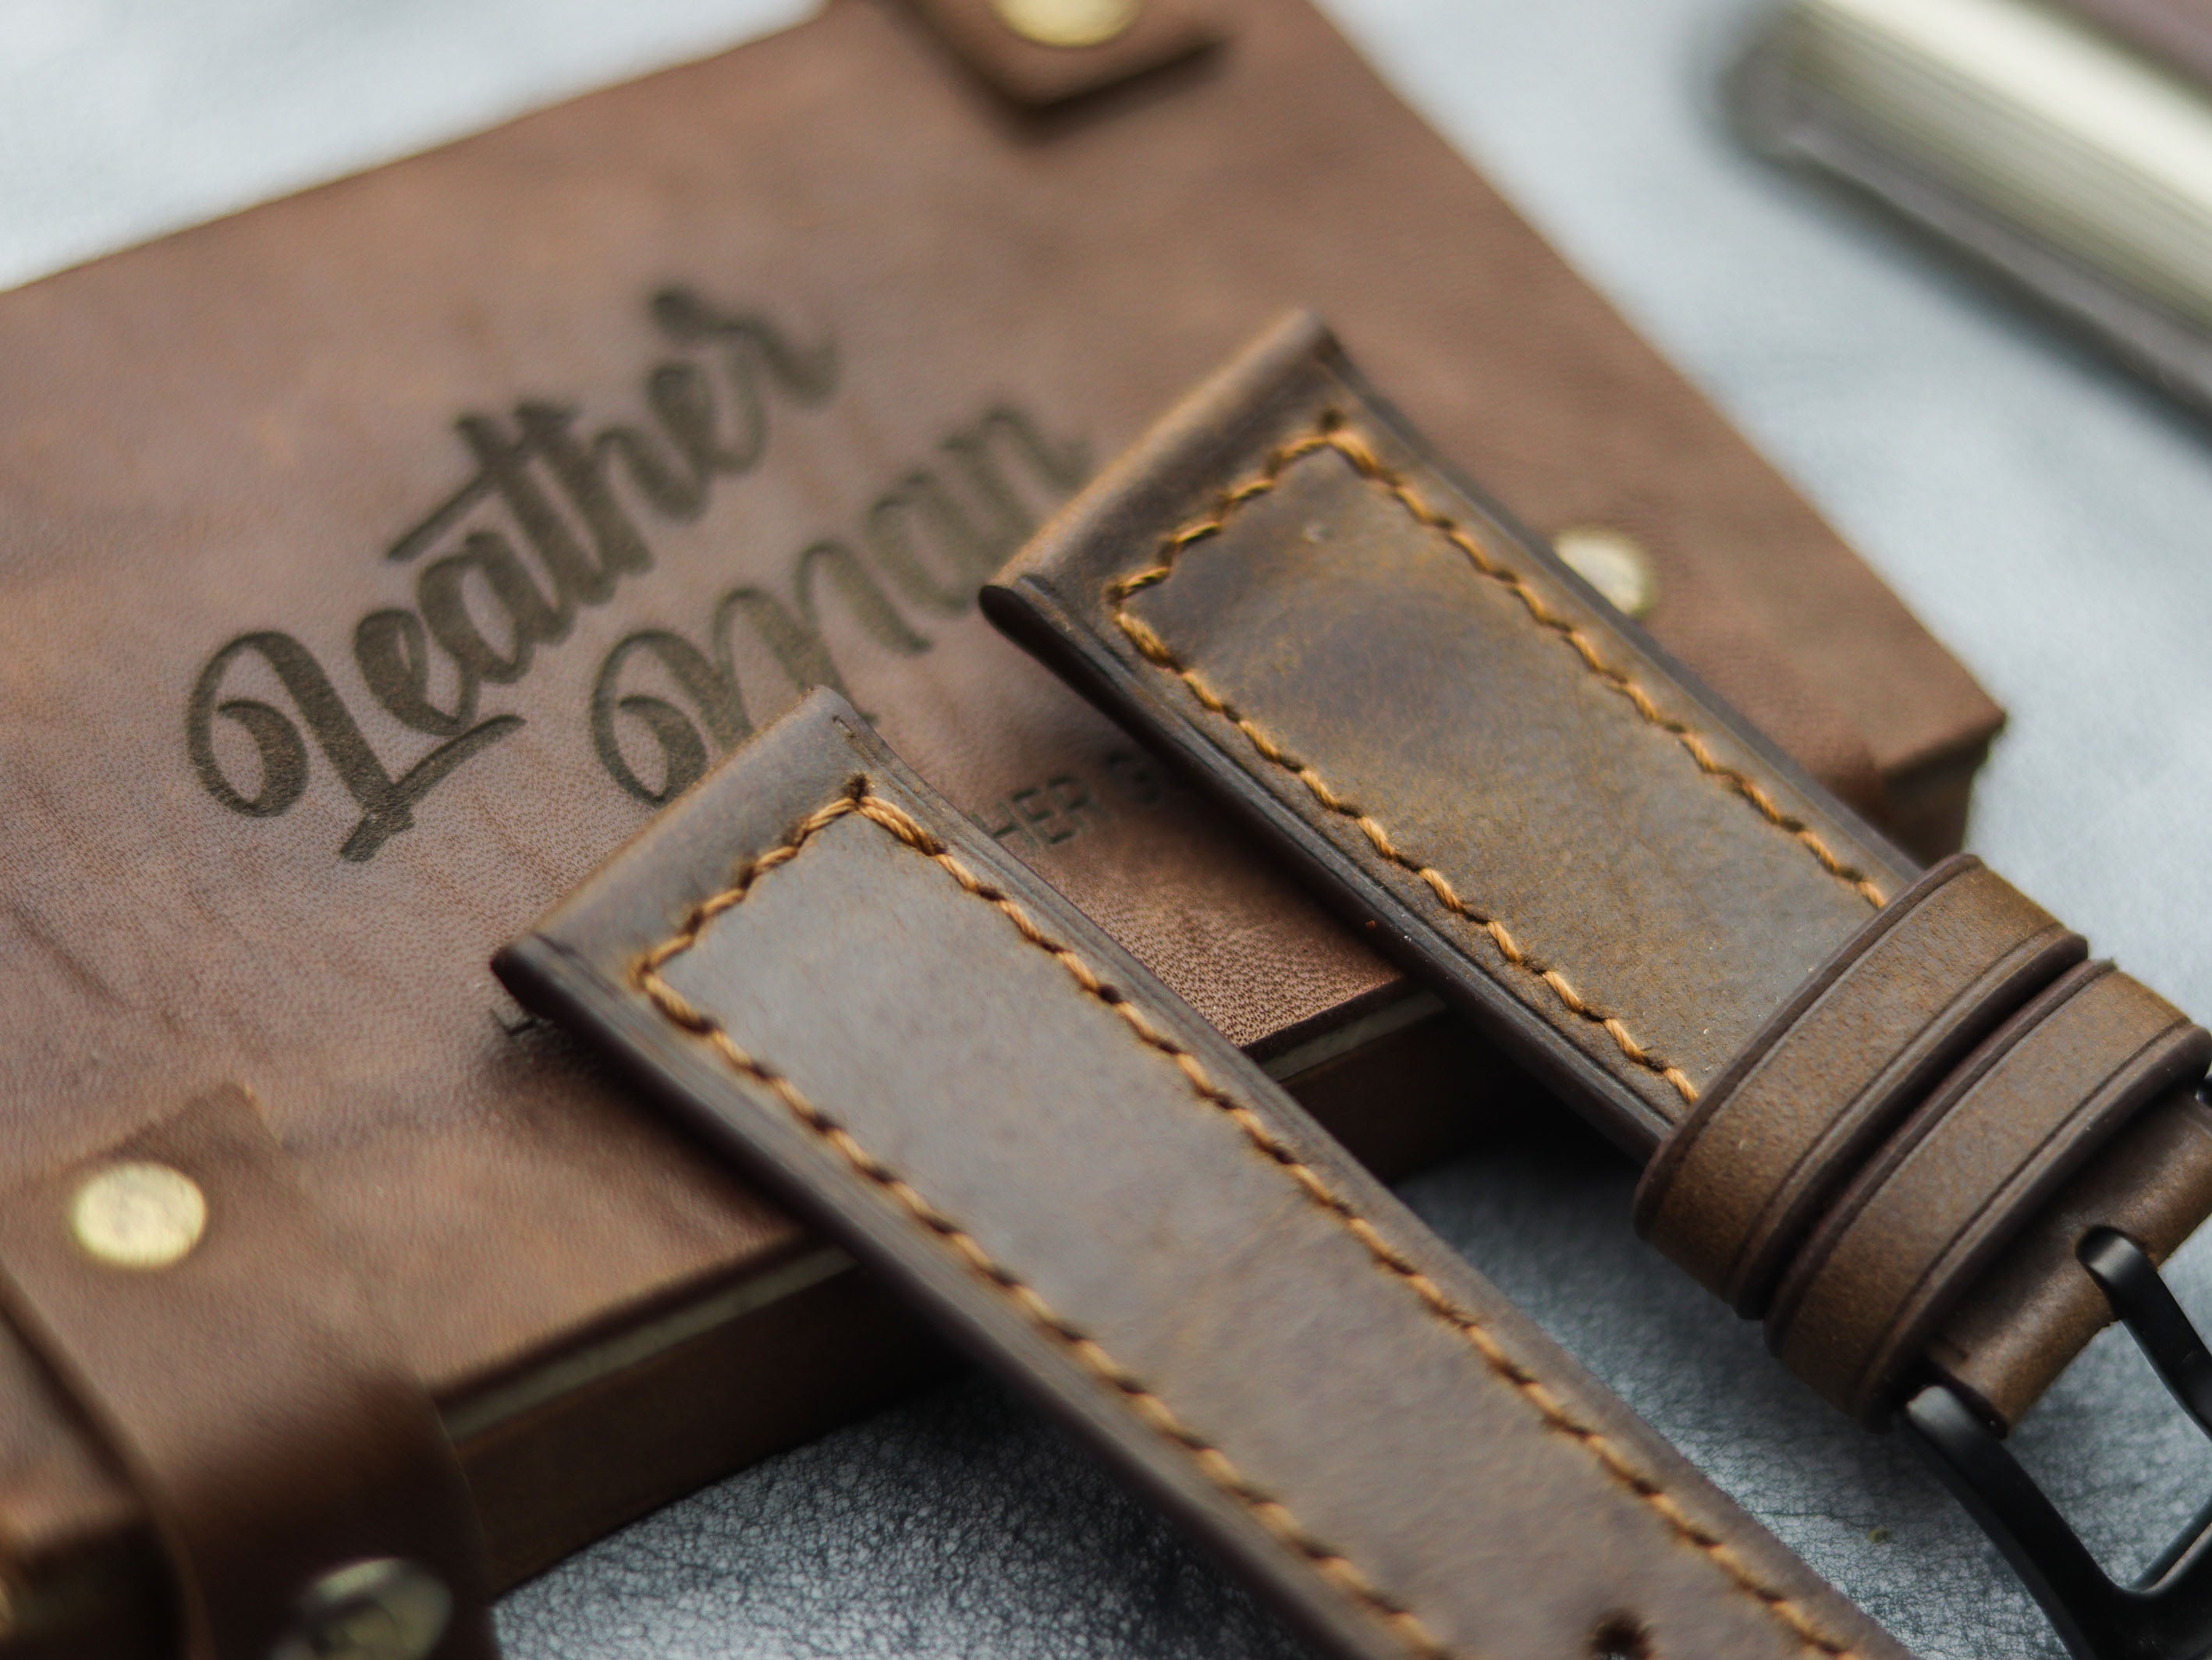 WOOD BROWN HAND-CRAFTED WATCH STRAPS - BOX STITCHED